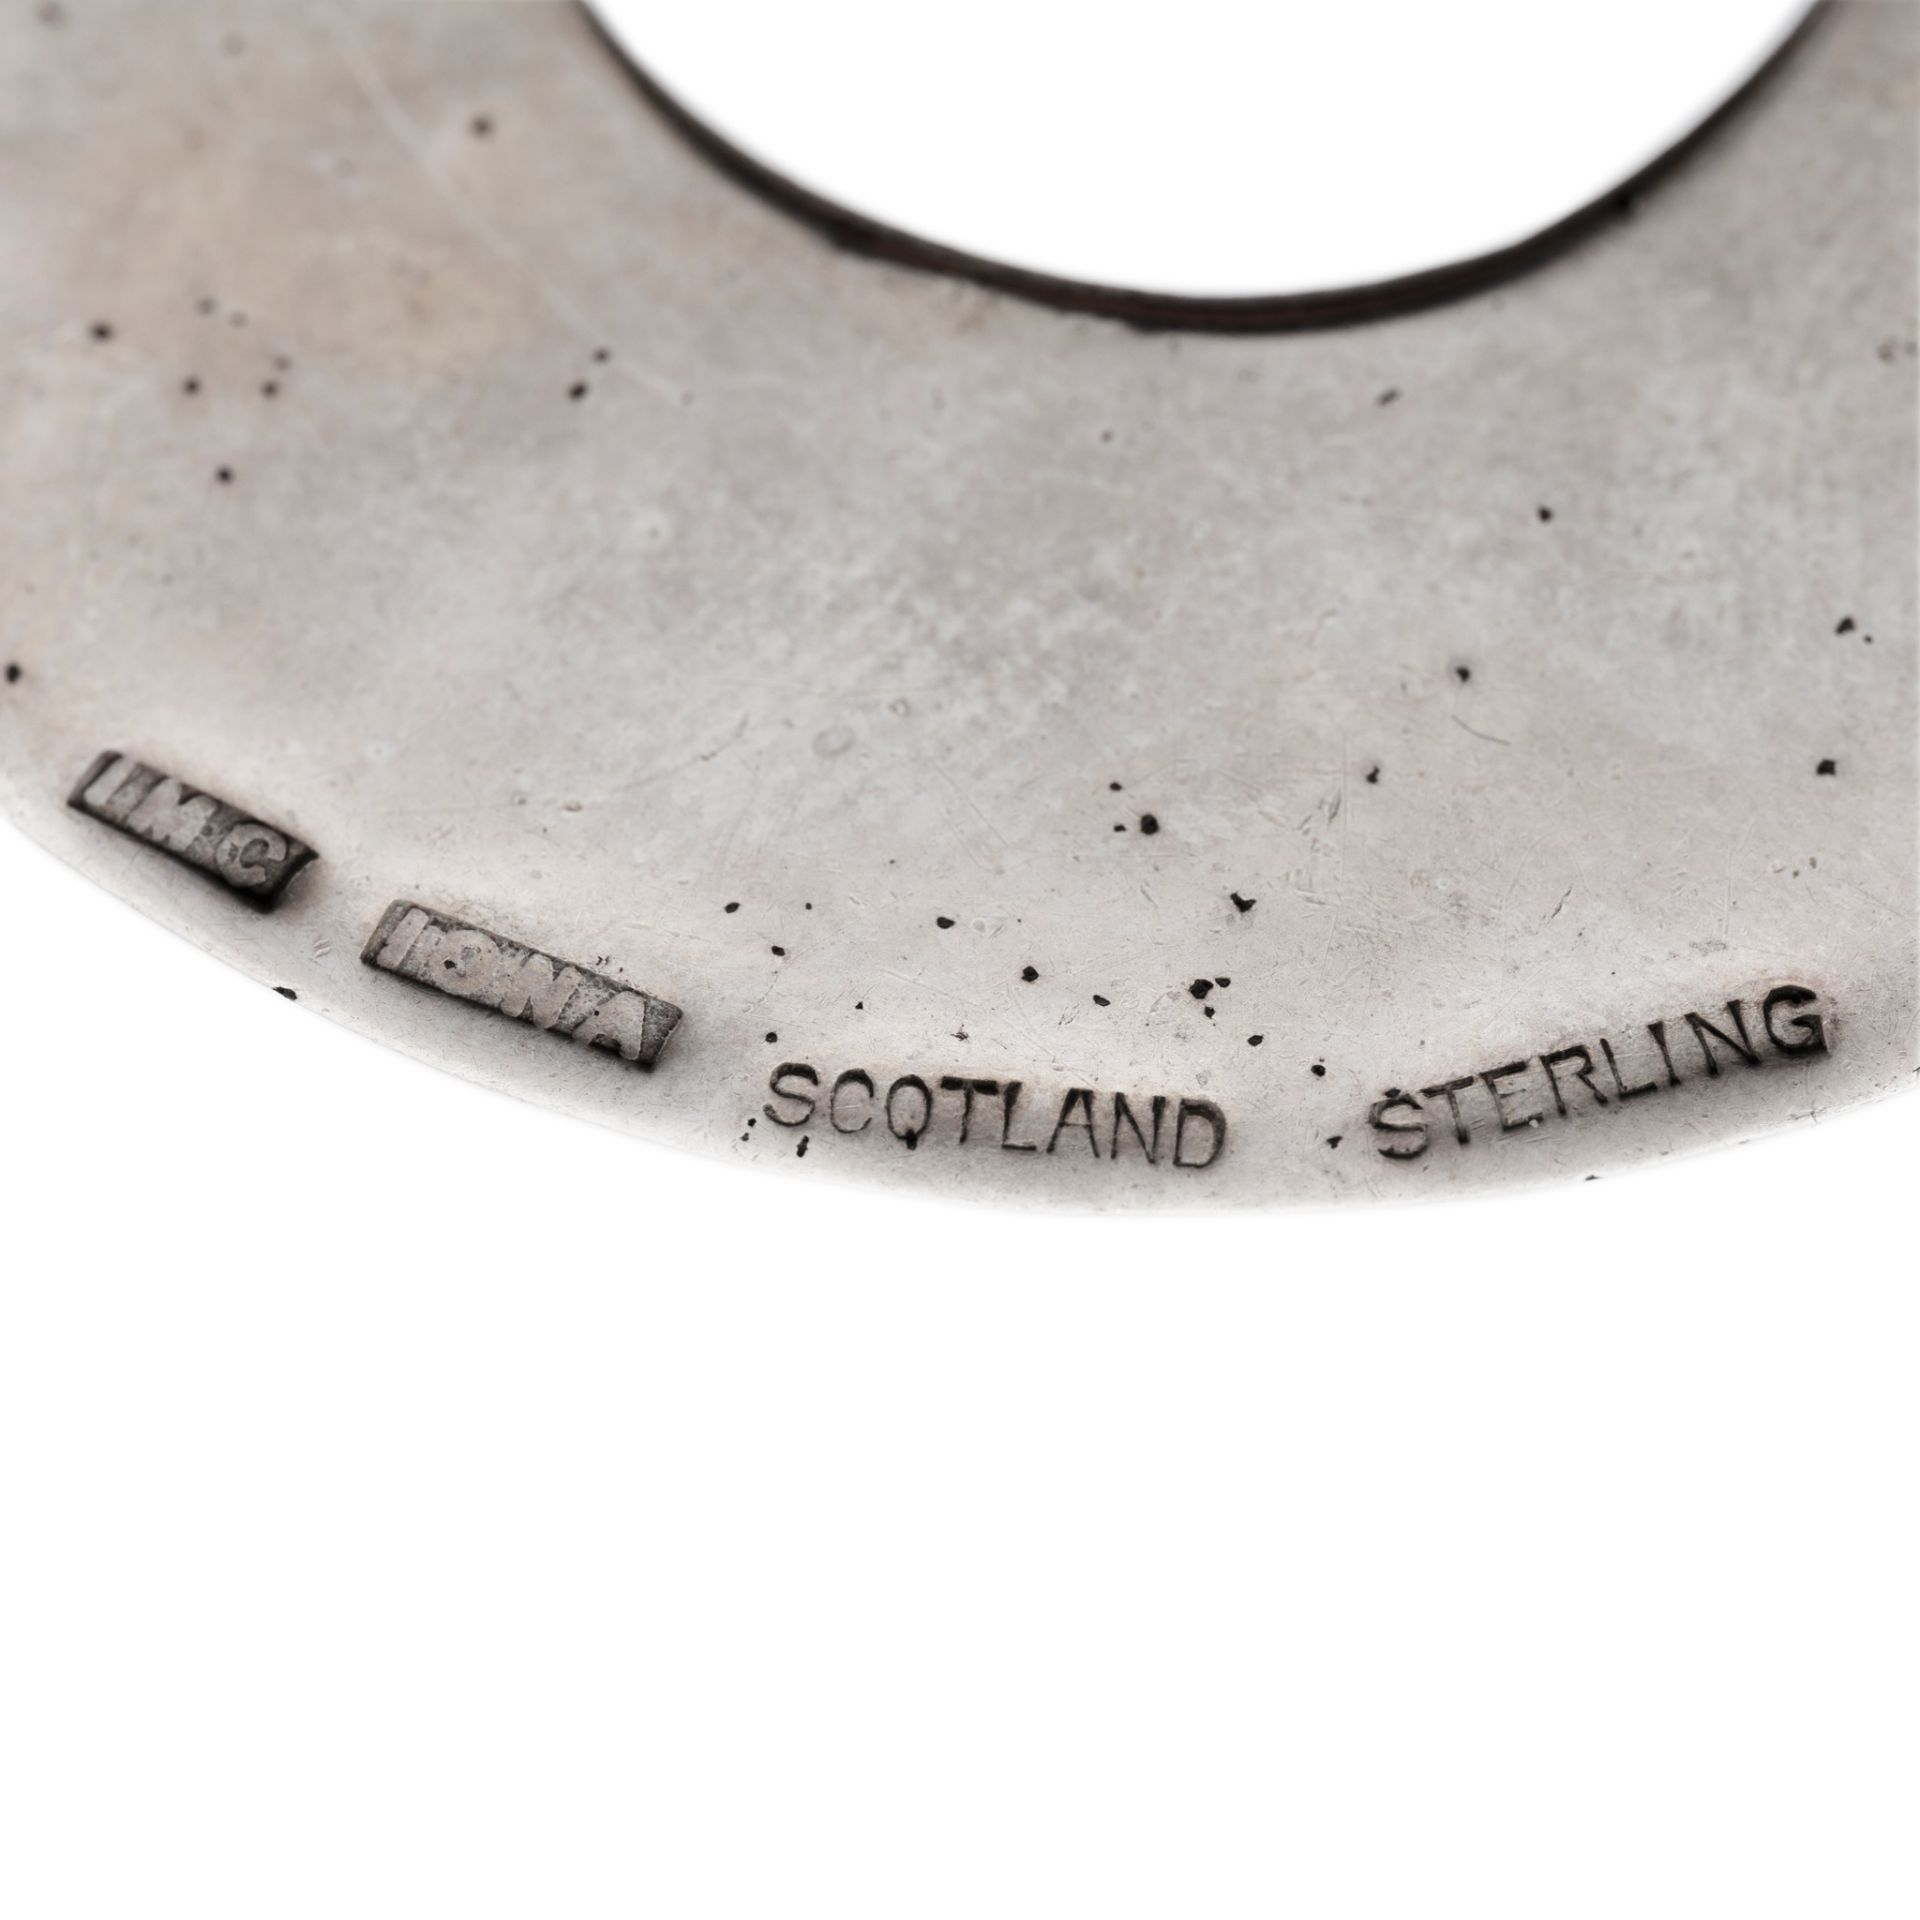 IONA – A COLLECTION OF SCOTTISH PROVINCIAL JEWELLERY IAIN MACCORMICK - Image 2 of 6